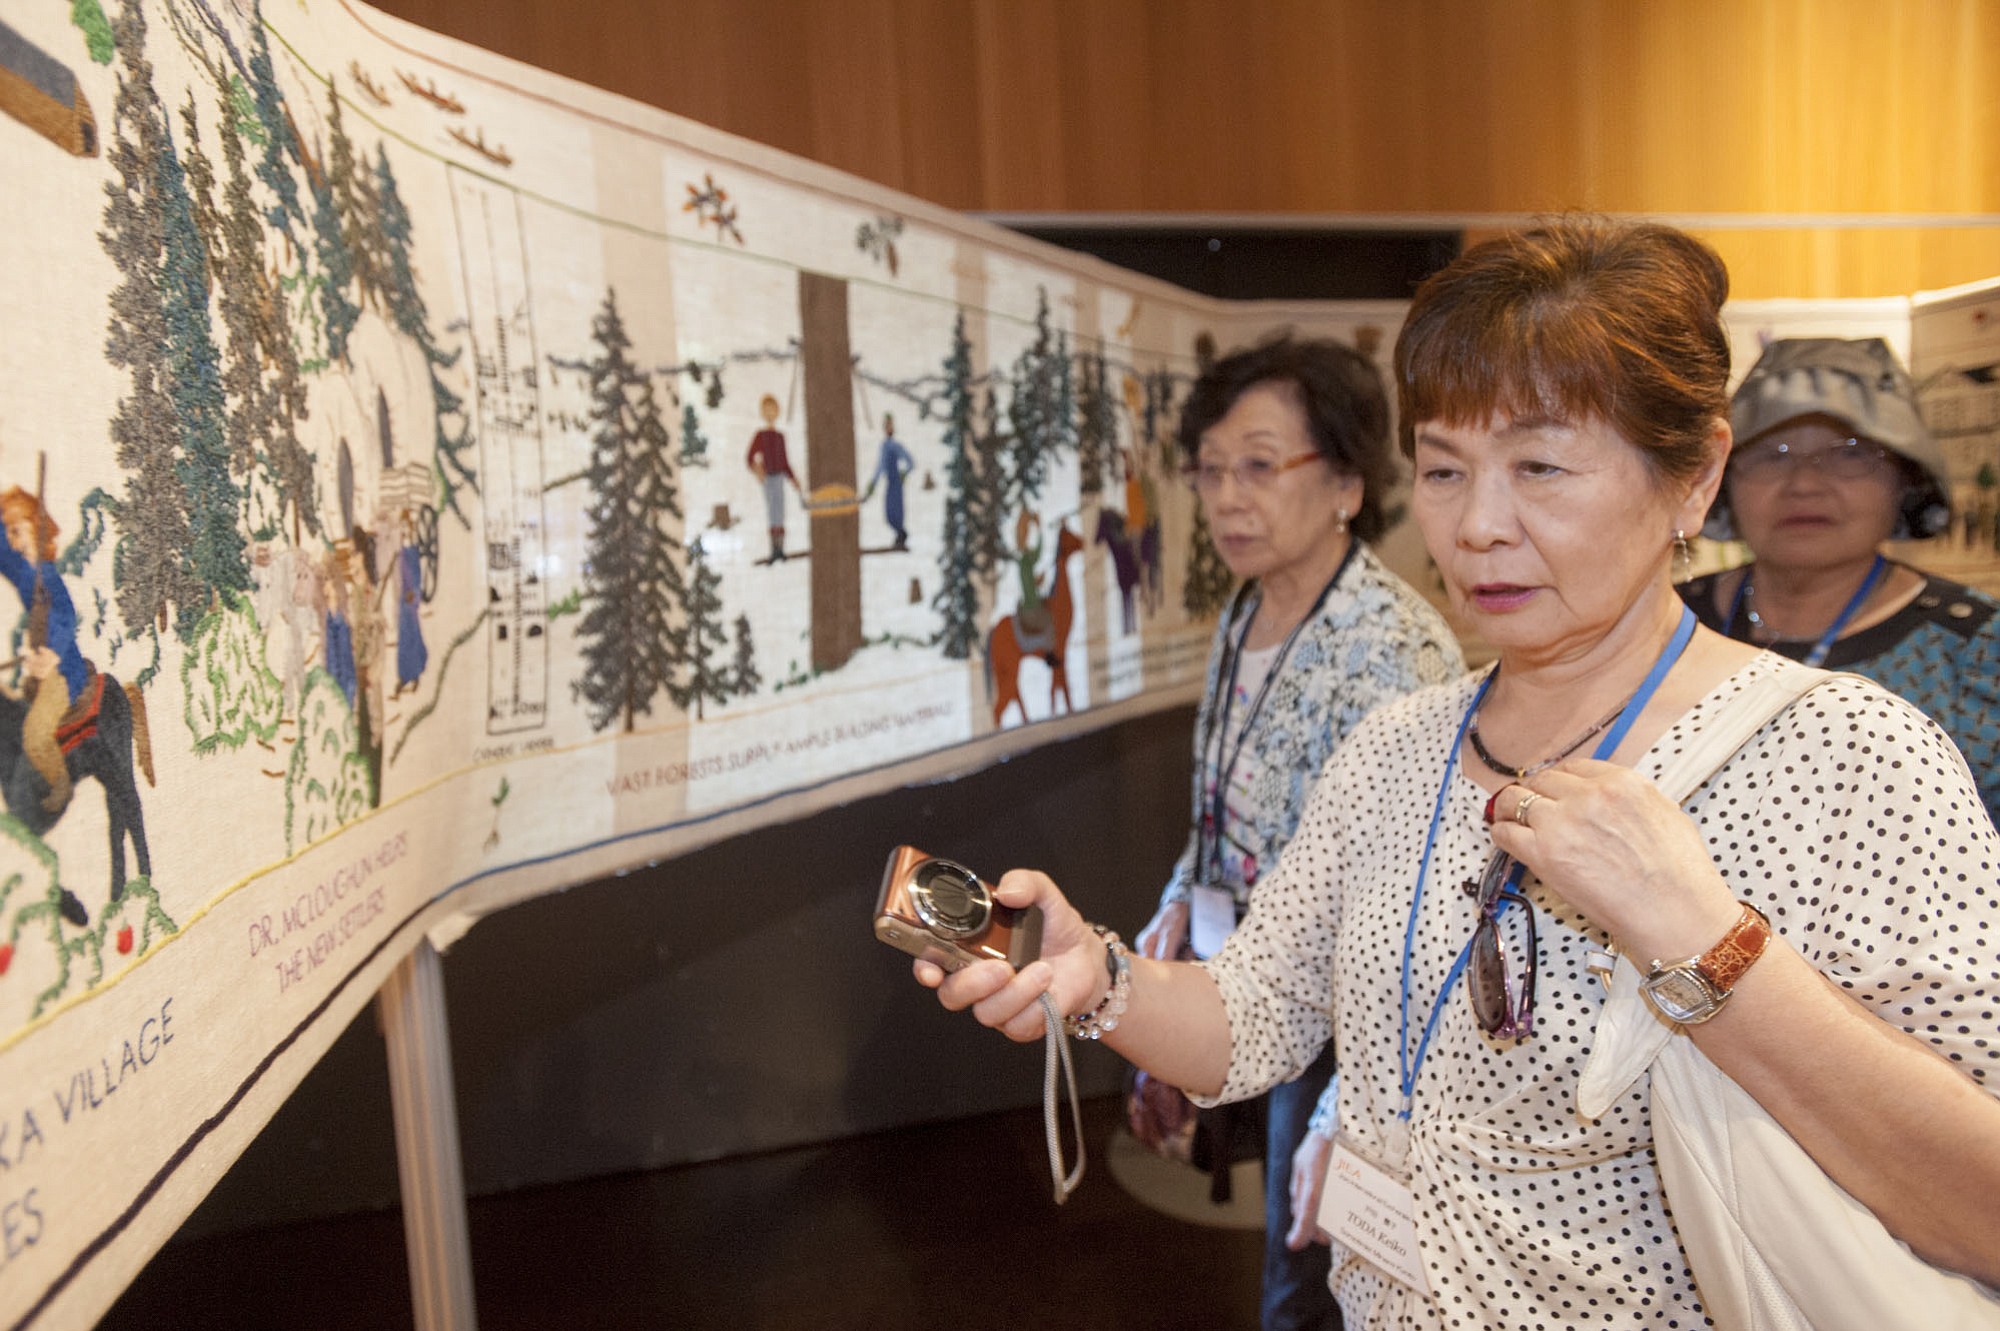 Keiko Toda examines a portion of the Fort Vancouver Tapestry that she helped stitch, which shows the history of Clark County.